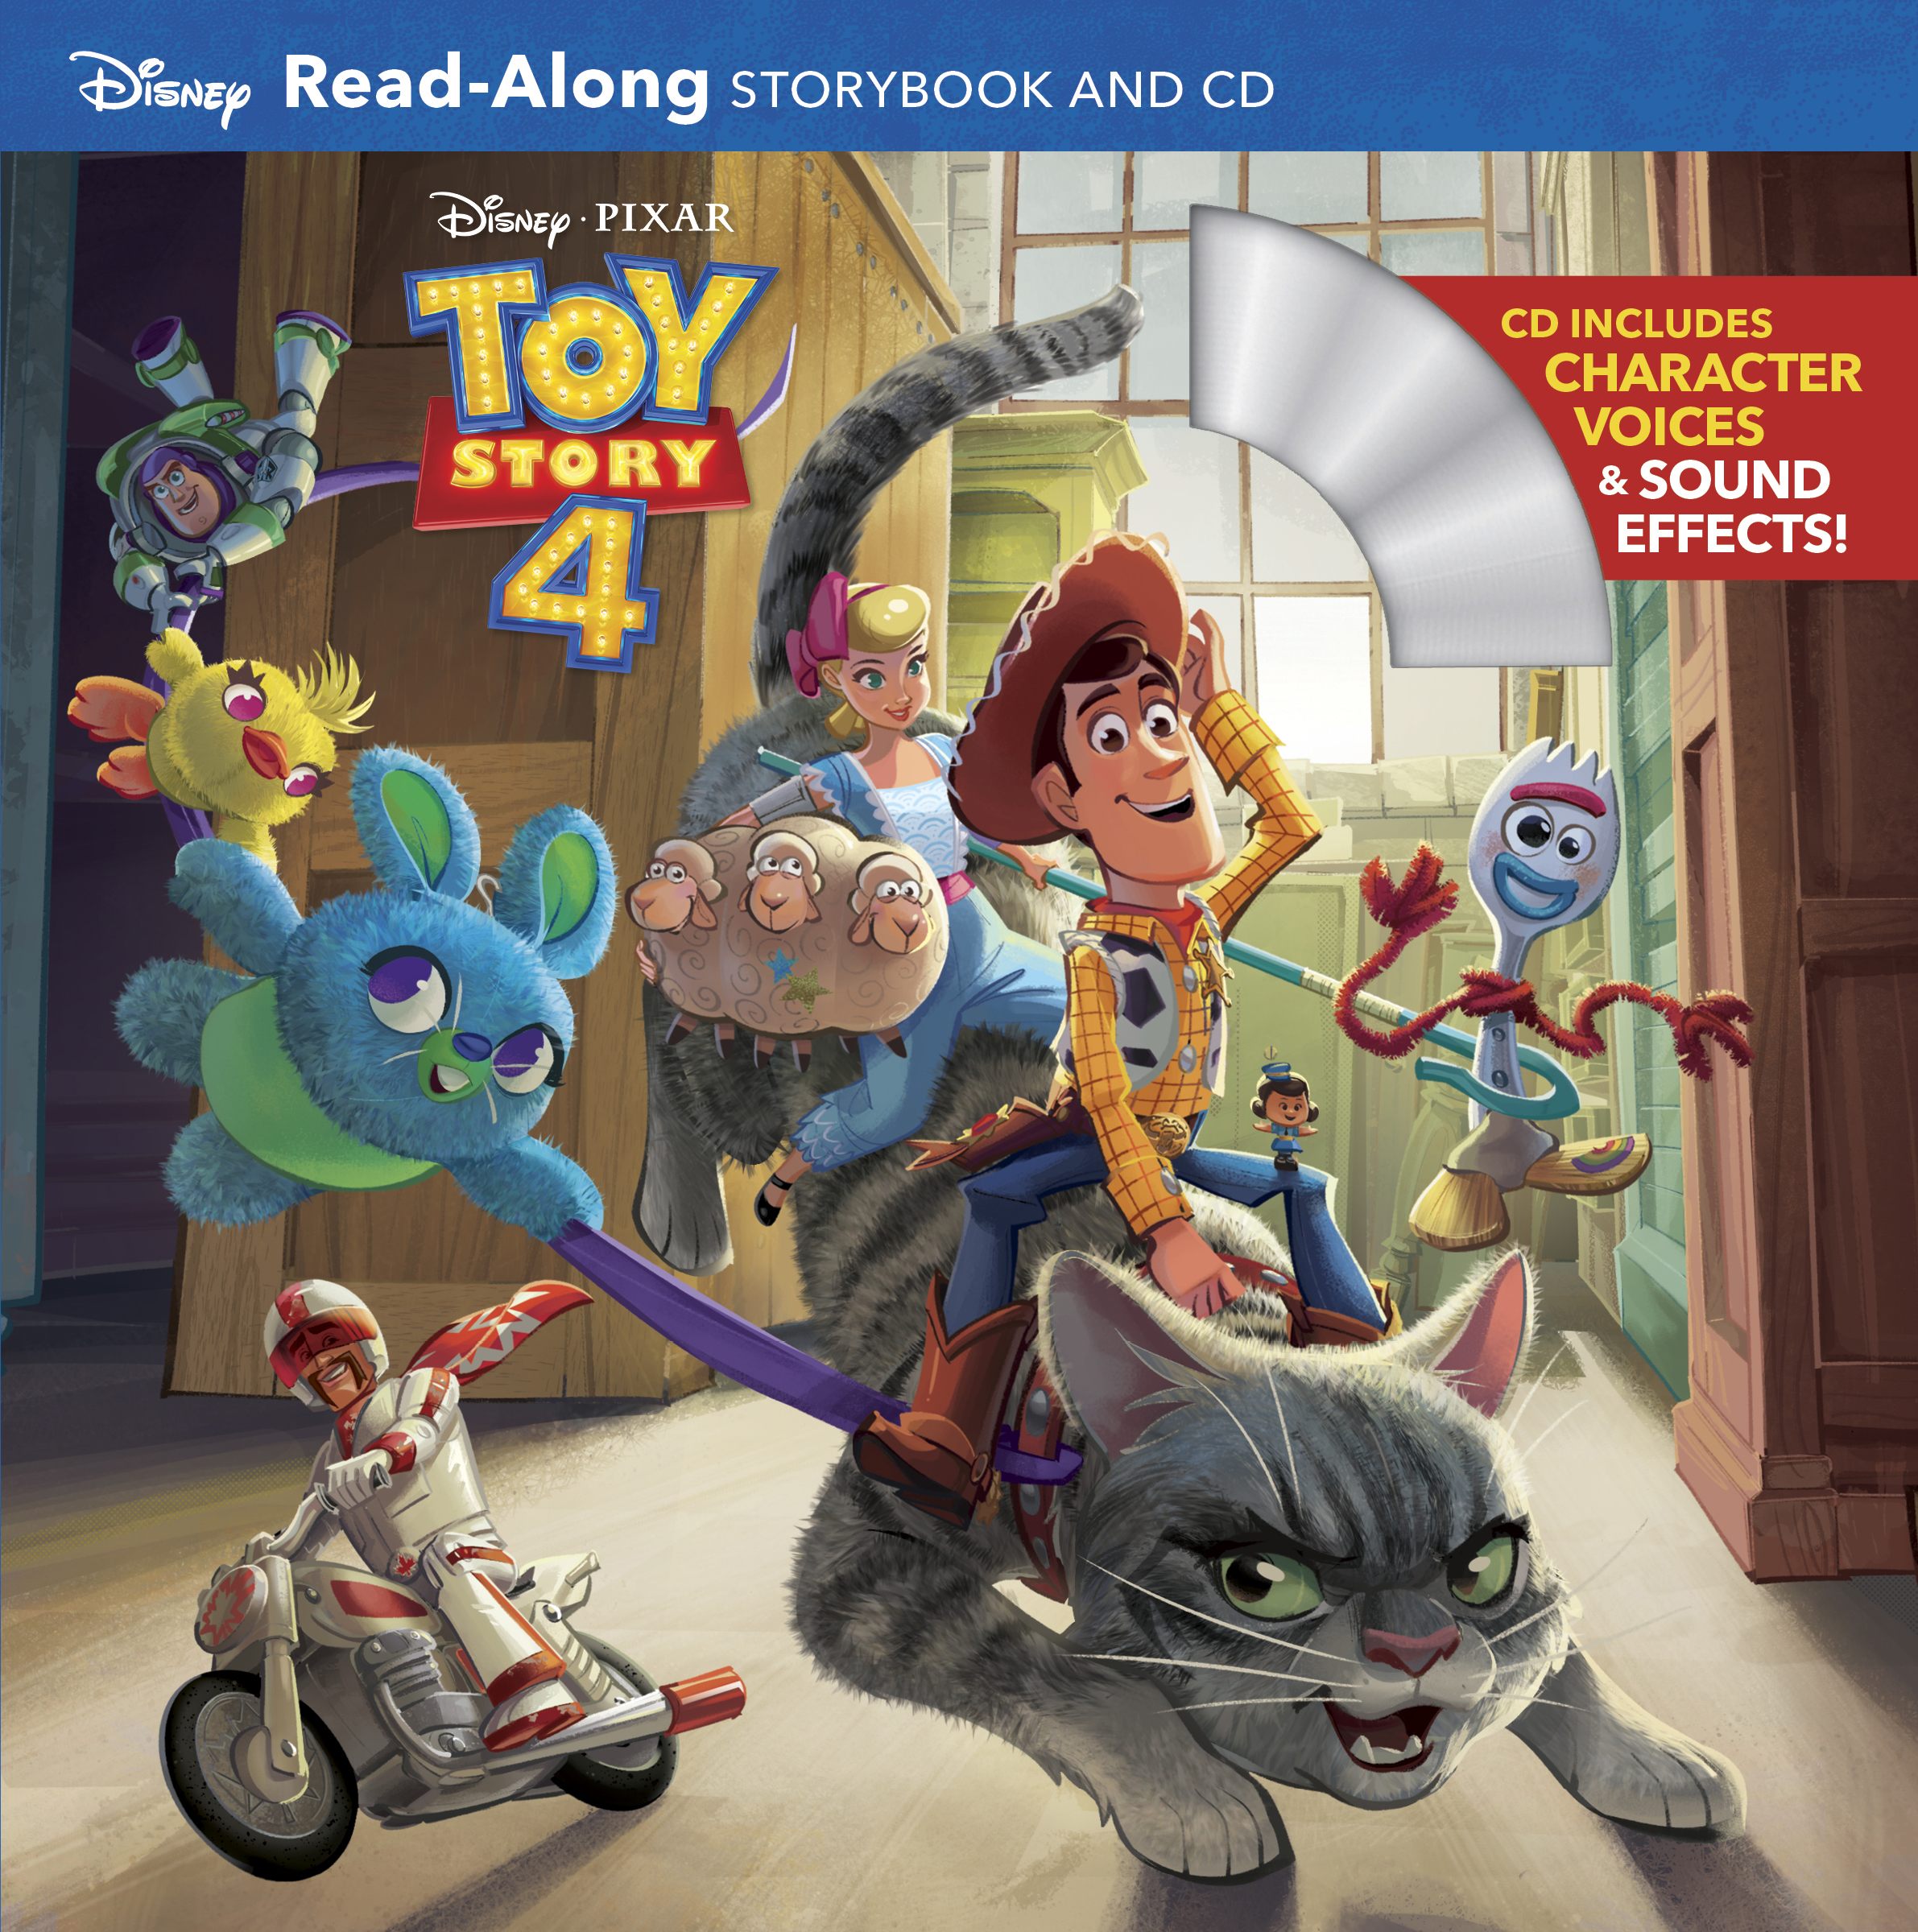 Toy Story 4 Read-Along Storybook and CD by Disney Book Group